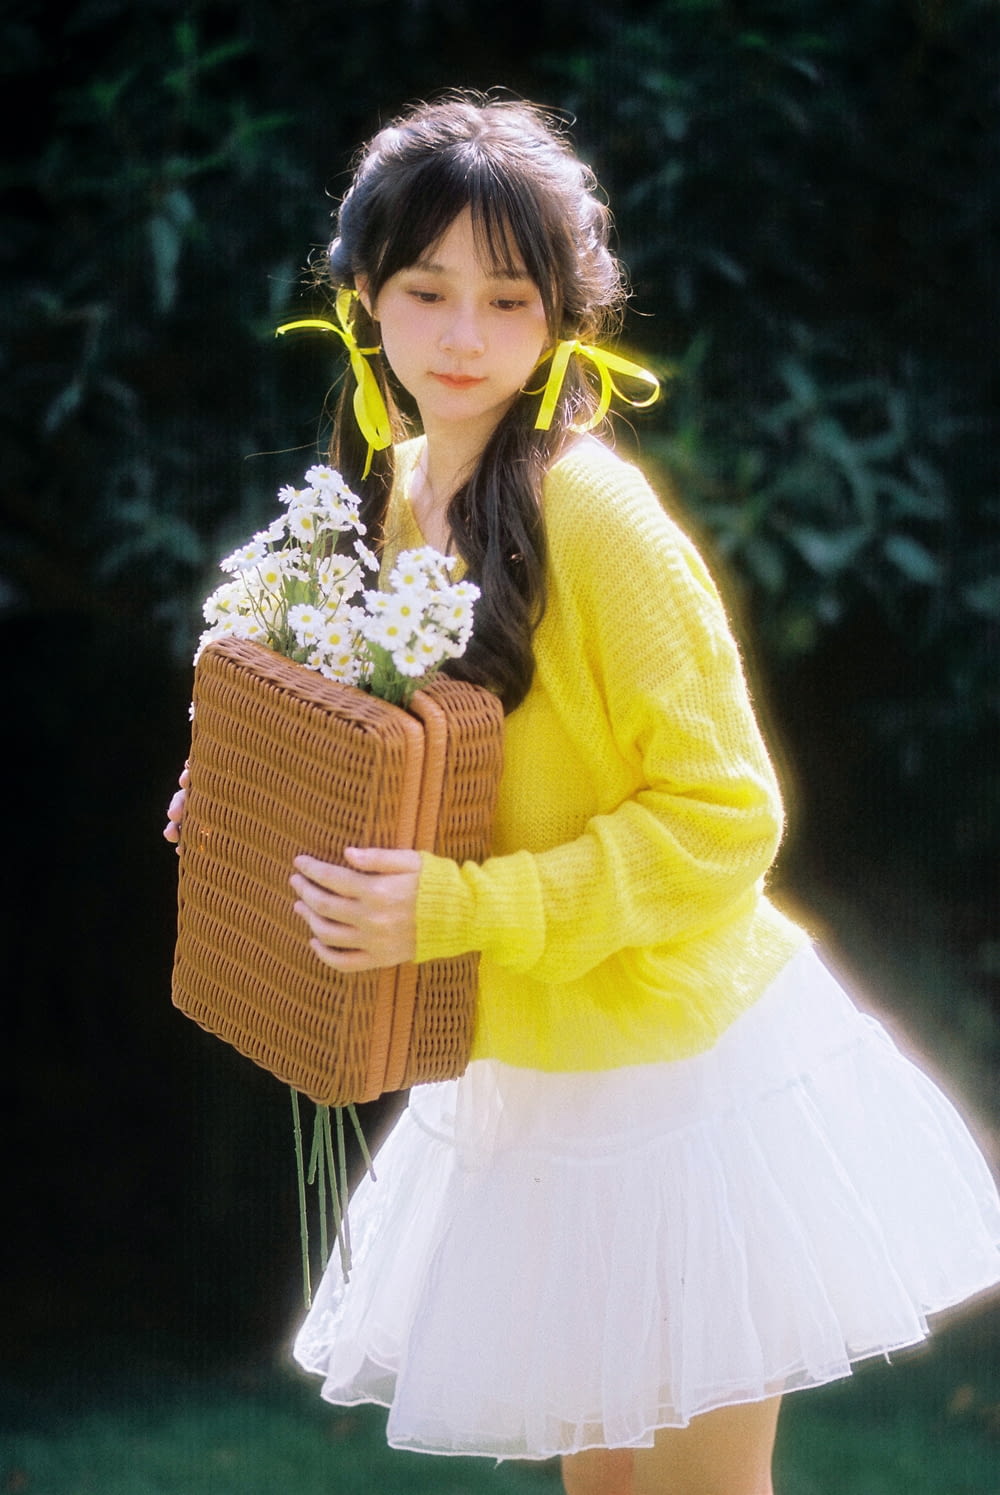 a girl in a yellow sweater holding a basket of flowers